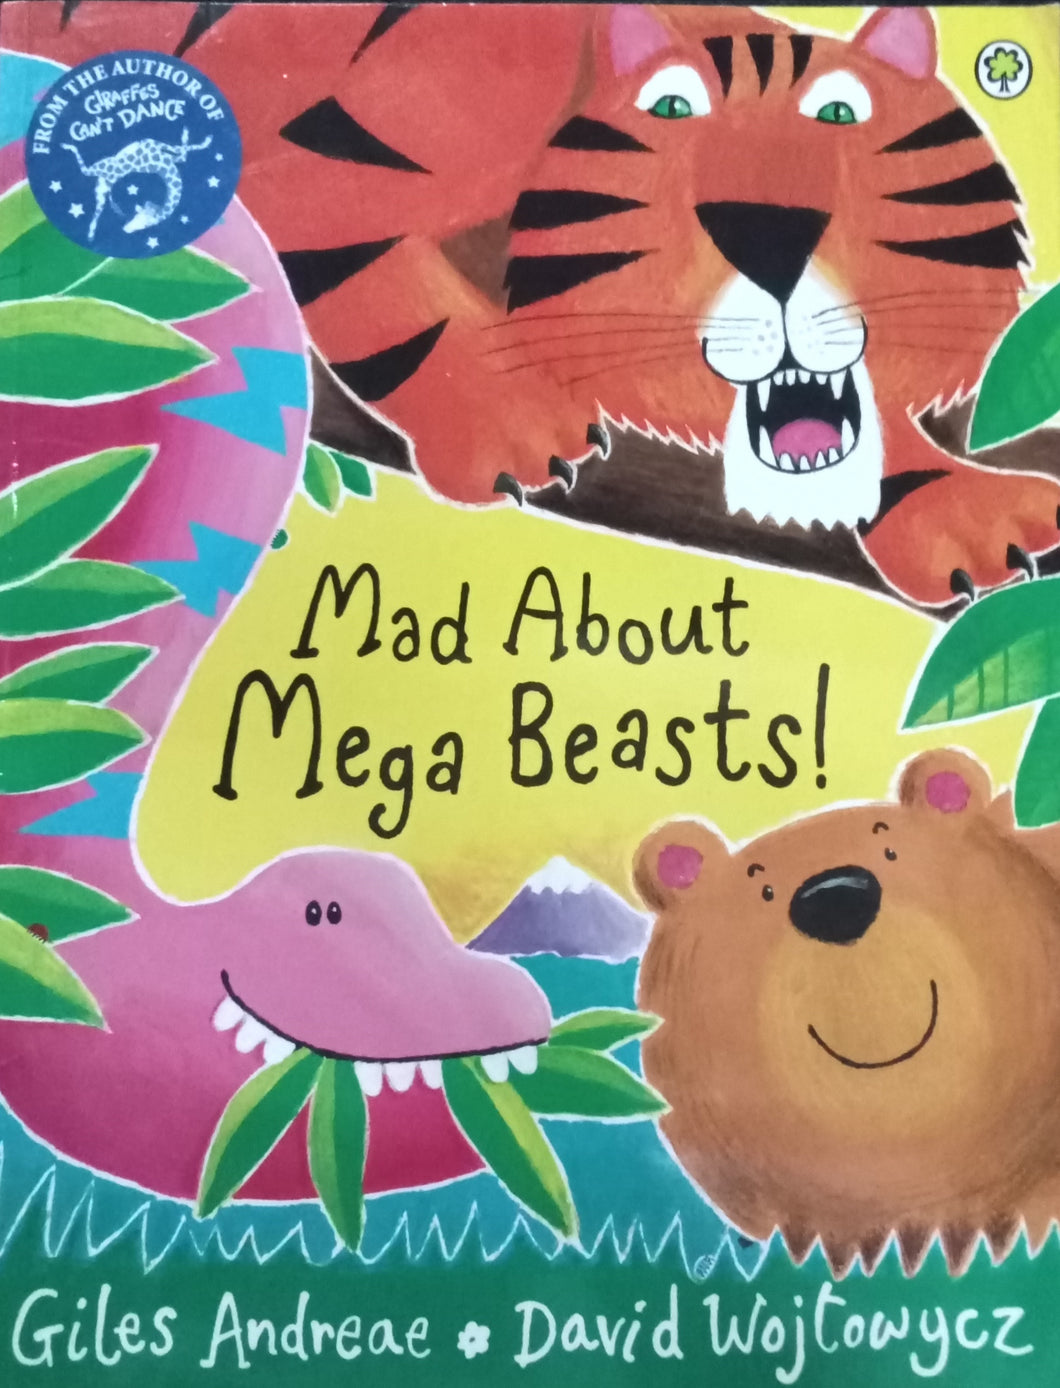 Mad about Mega Beasts! by Giles Andreae